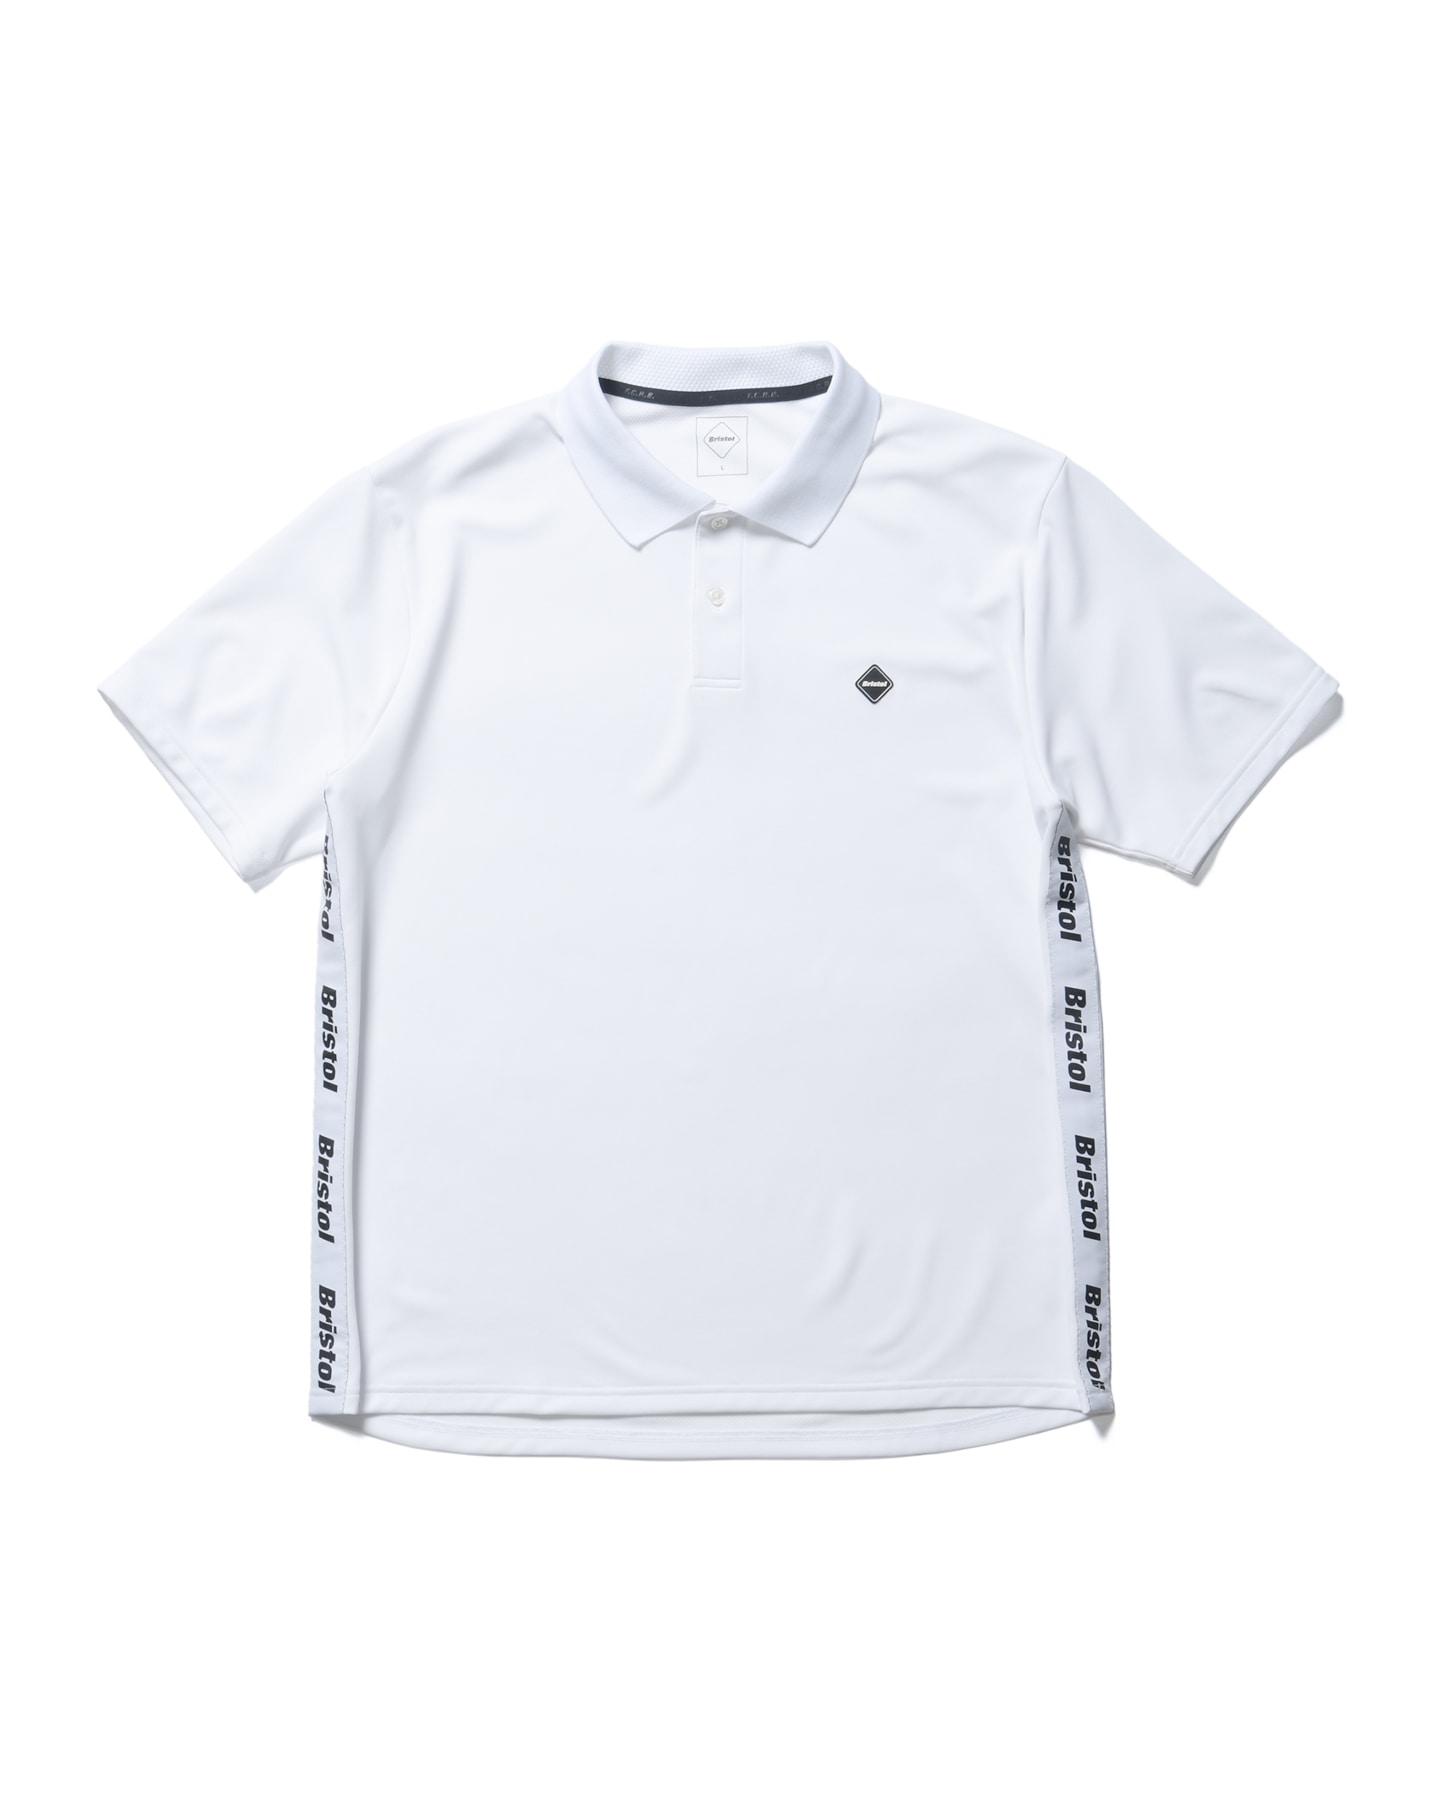 【M】22 fcrb S/S TEAM POLO WHITEポロシャツ